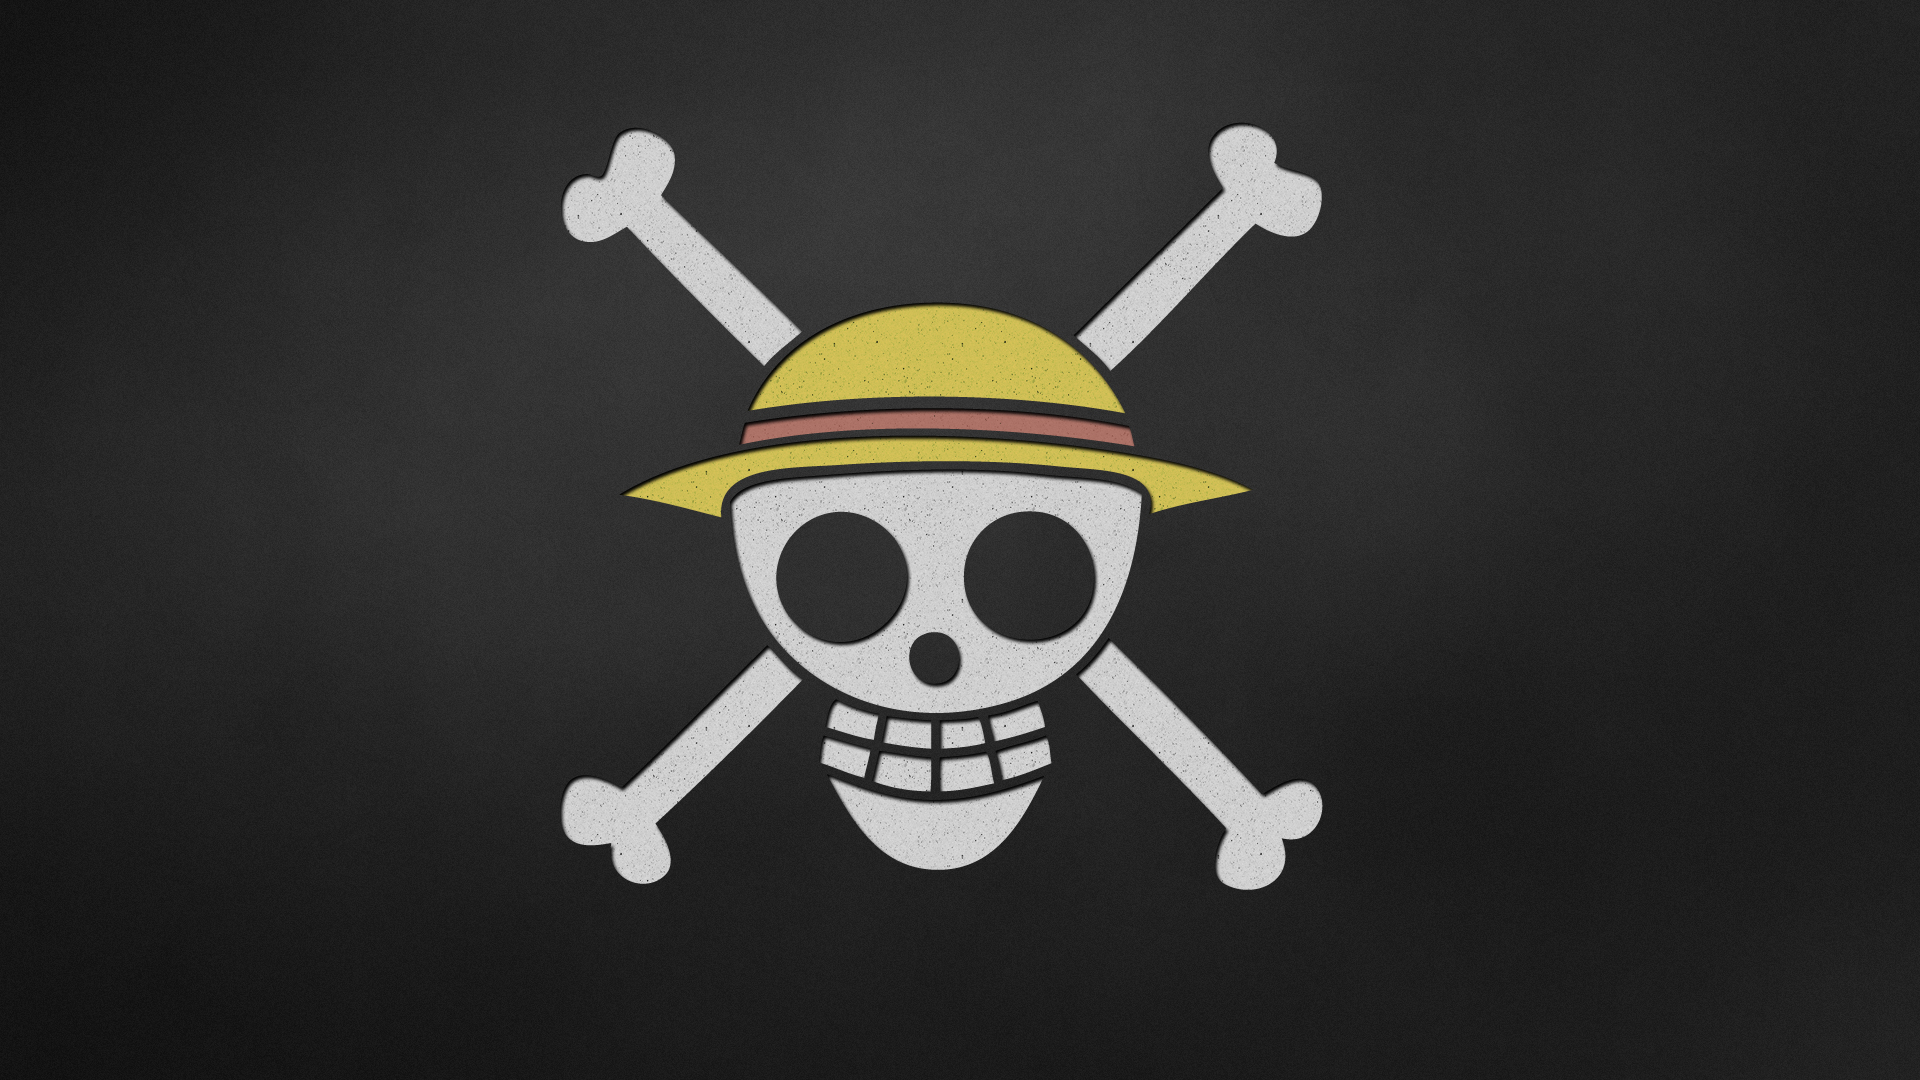 One Piece Wallpapers | Best Wallpapers